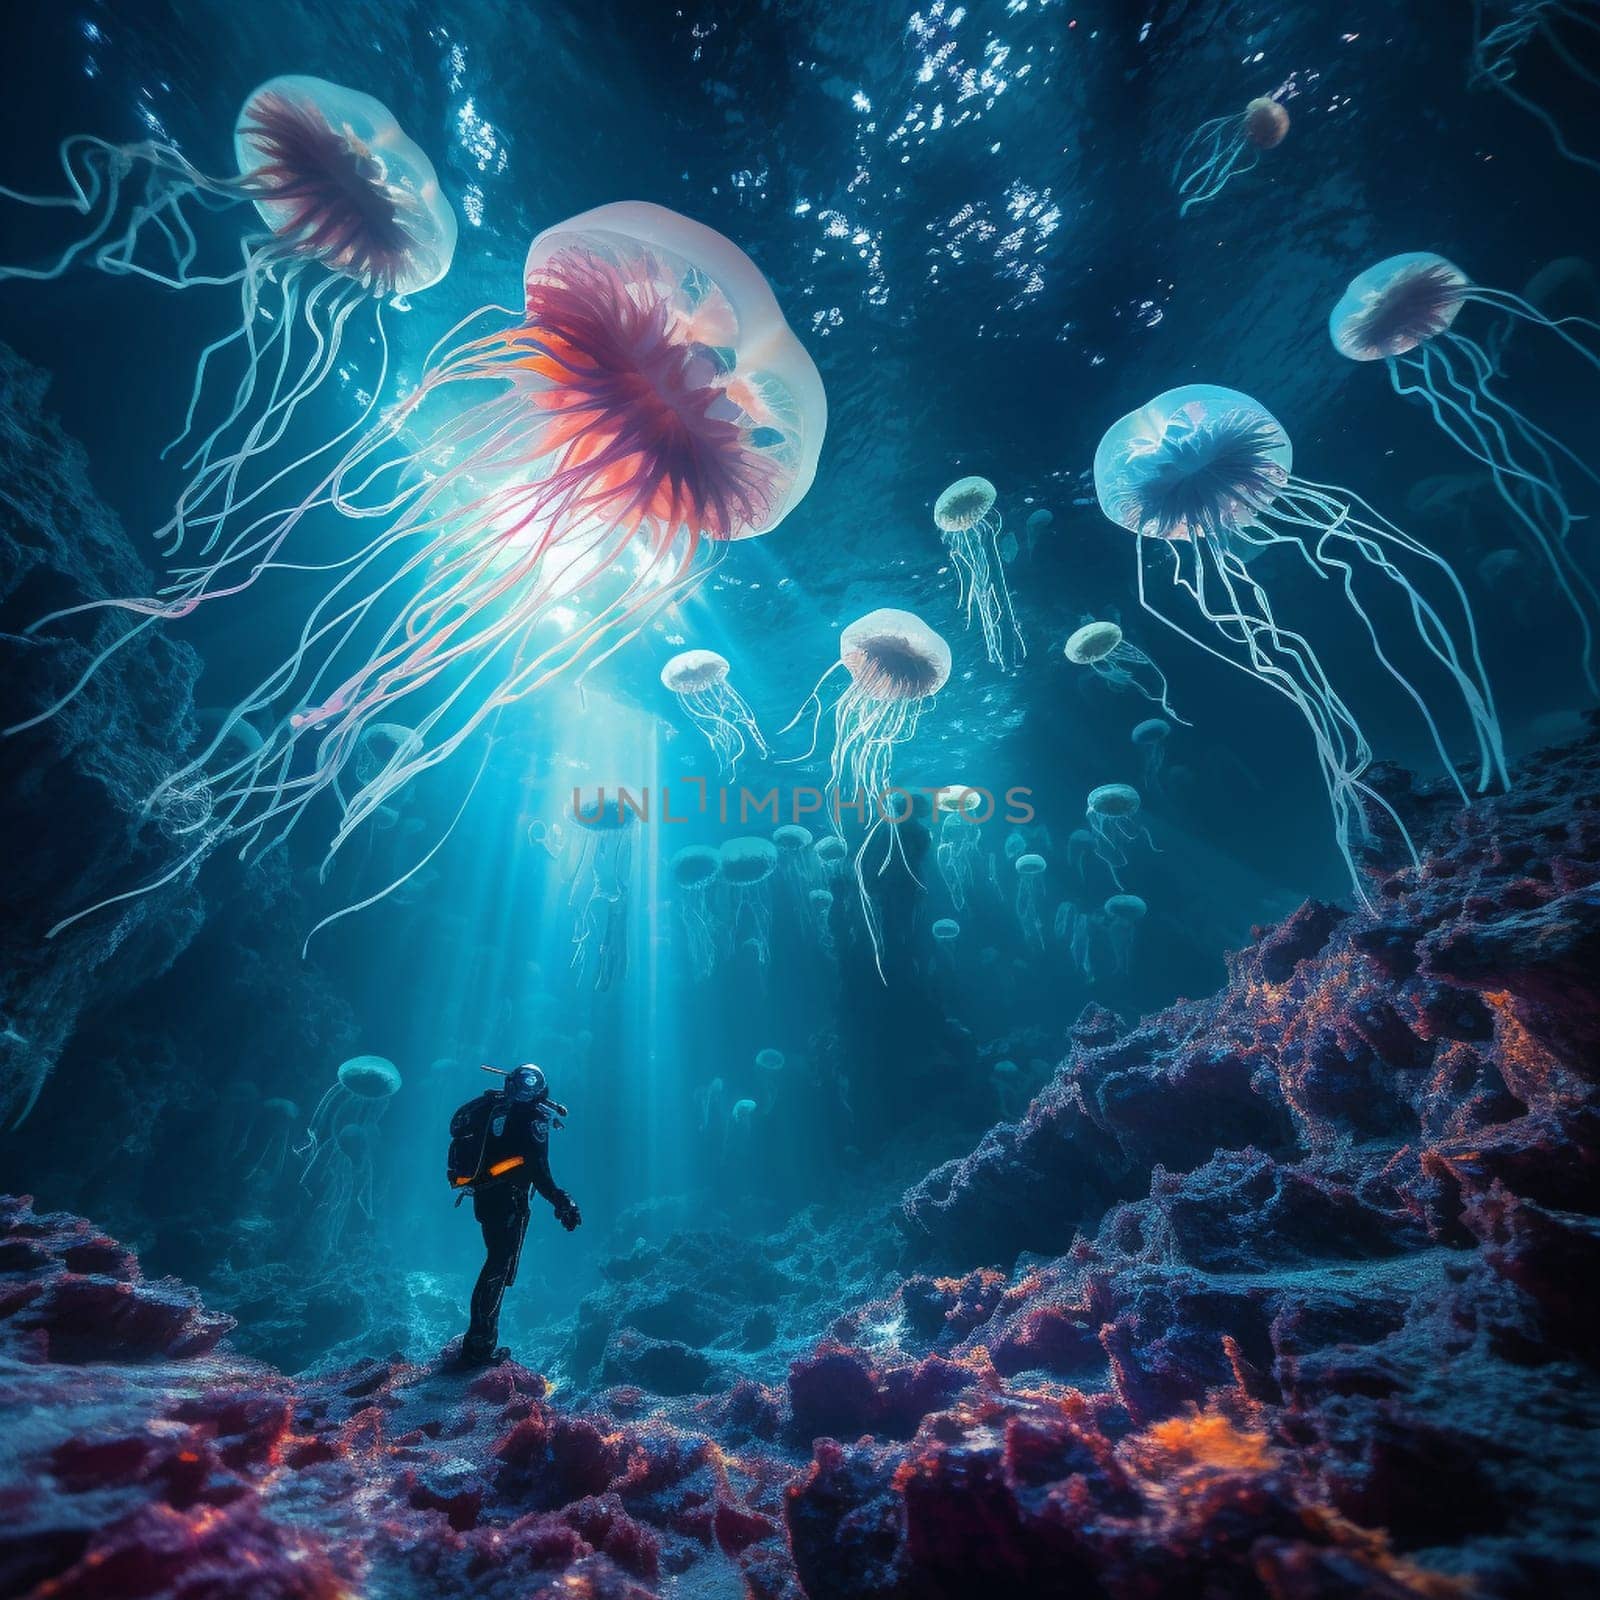 Experience the magic of the deep sea with this captivating image of a brave scuba diver exploring an otherworldly underwater landscape. Surrounding the diver are vibrant and exotic marine life, including luminescent jellyfish, colorful coral reefs, and majestic sea creatures that defy imagination. The ethereal realm beneath the ocean's surface comes to life as the light dances and shimmers through the water, creating an enchanting and surreal ambiance. Immerse yourself in this image and let your imagination run wild in this magical underwater world.